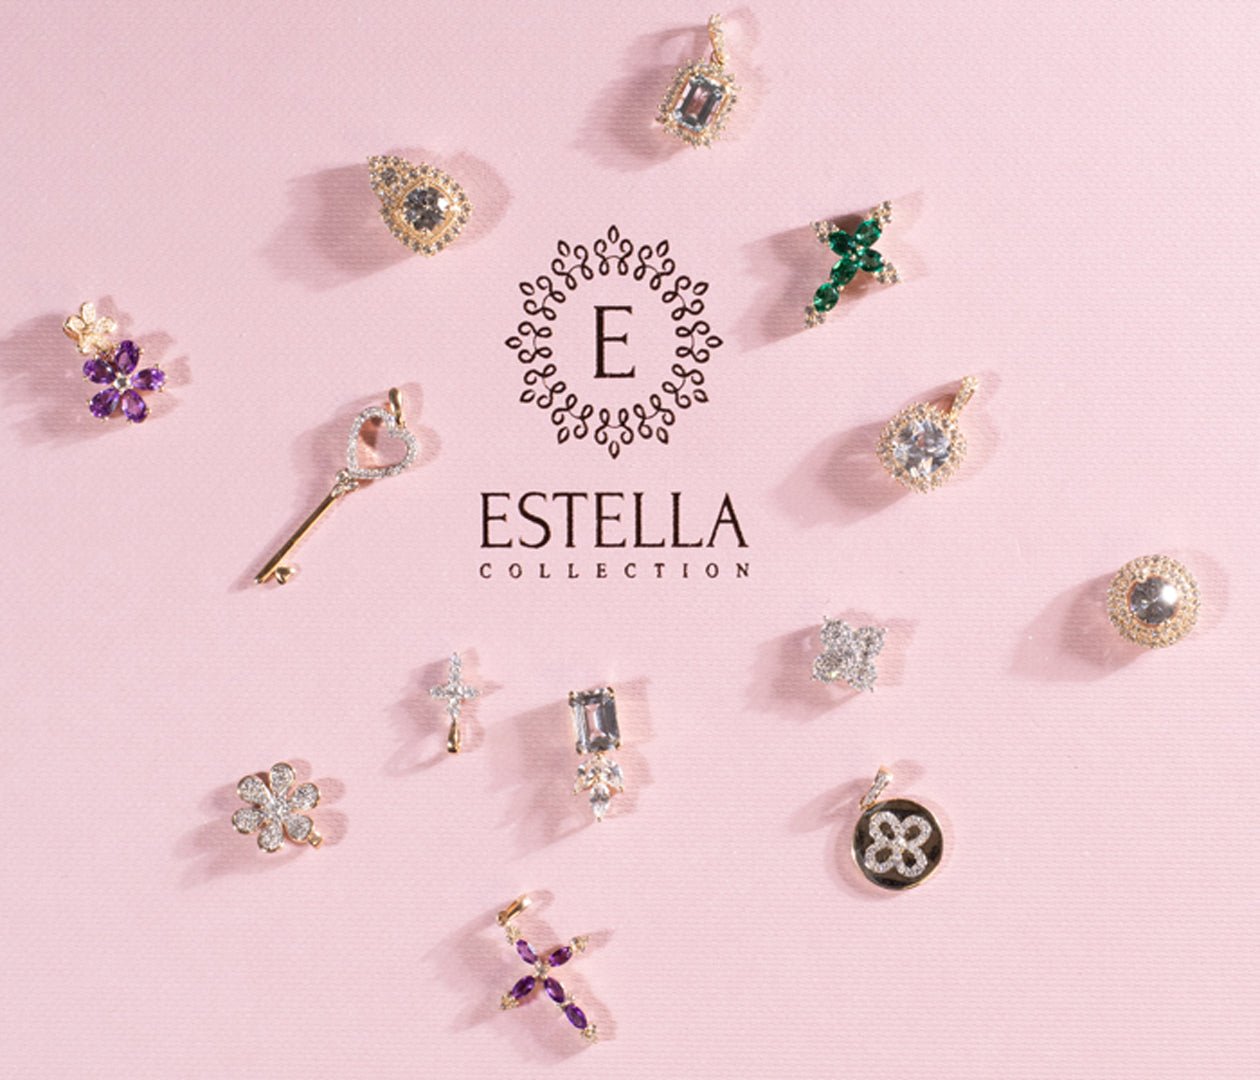 Estella Collection’s Ultimate Holiday Gift Guide: Our Favorite Jewelry Gifts For Christmas - Estella Collection